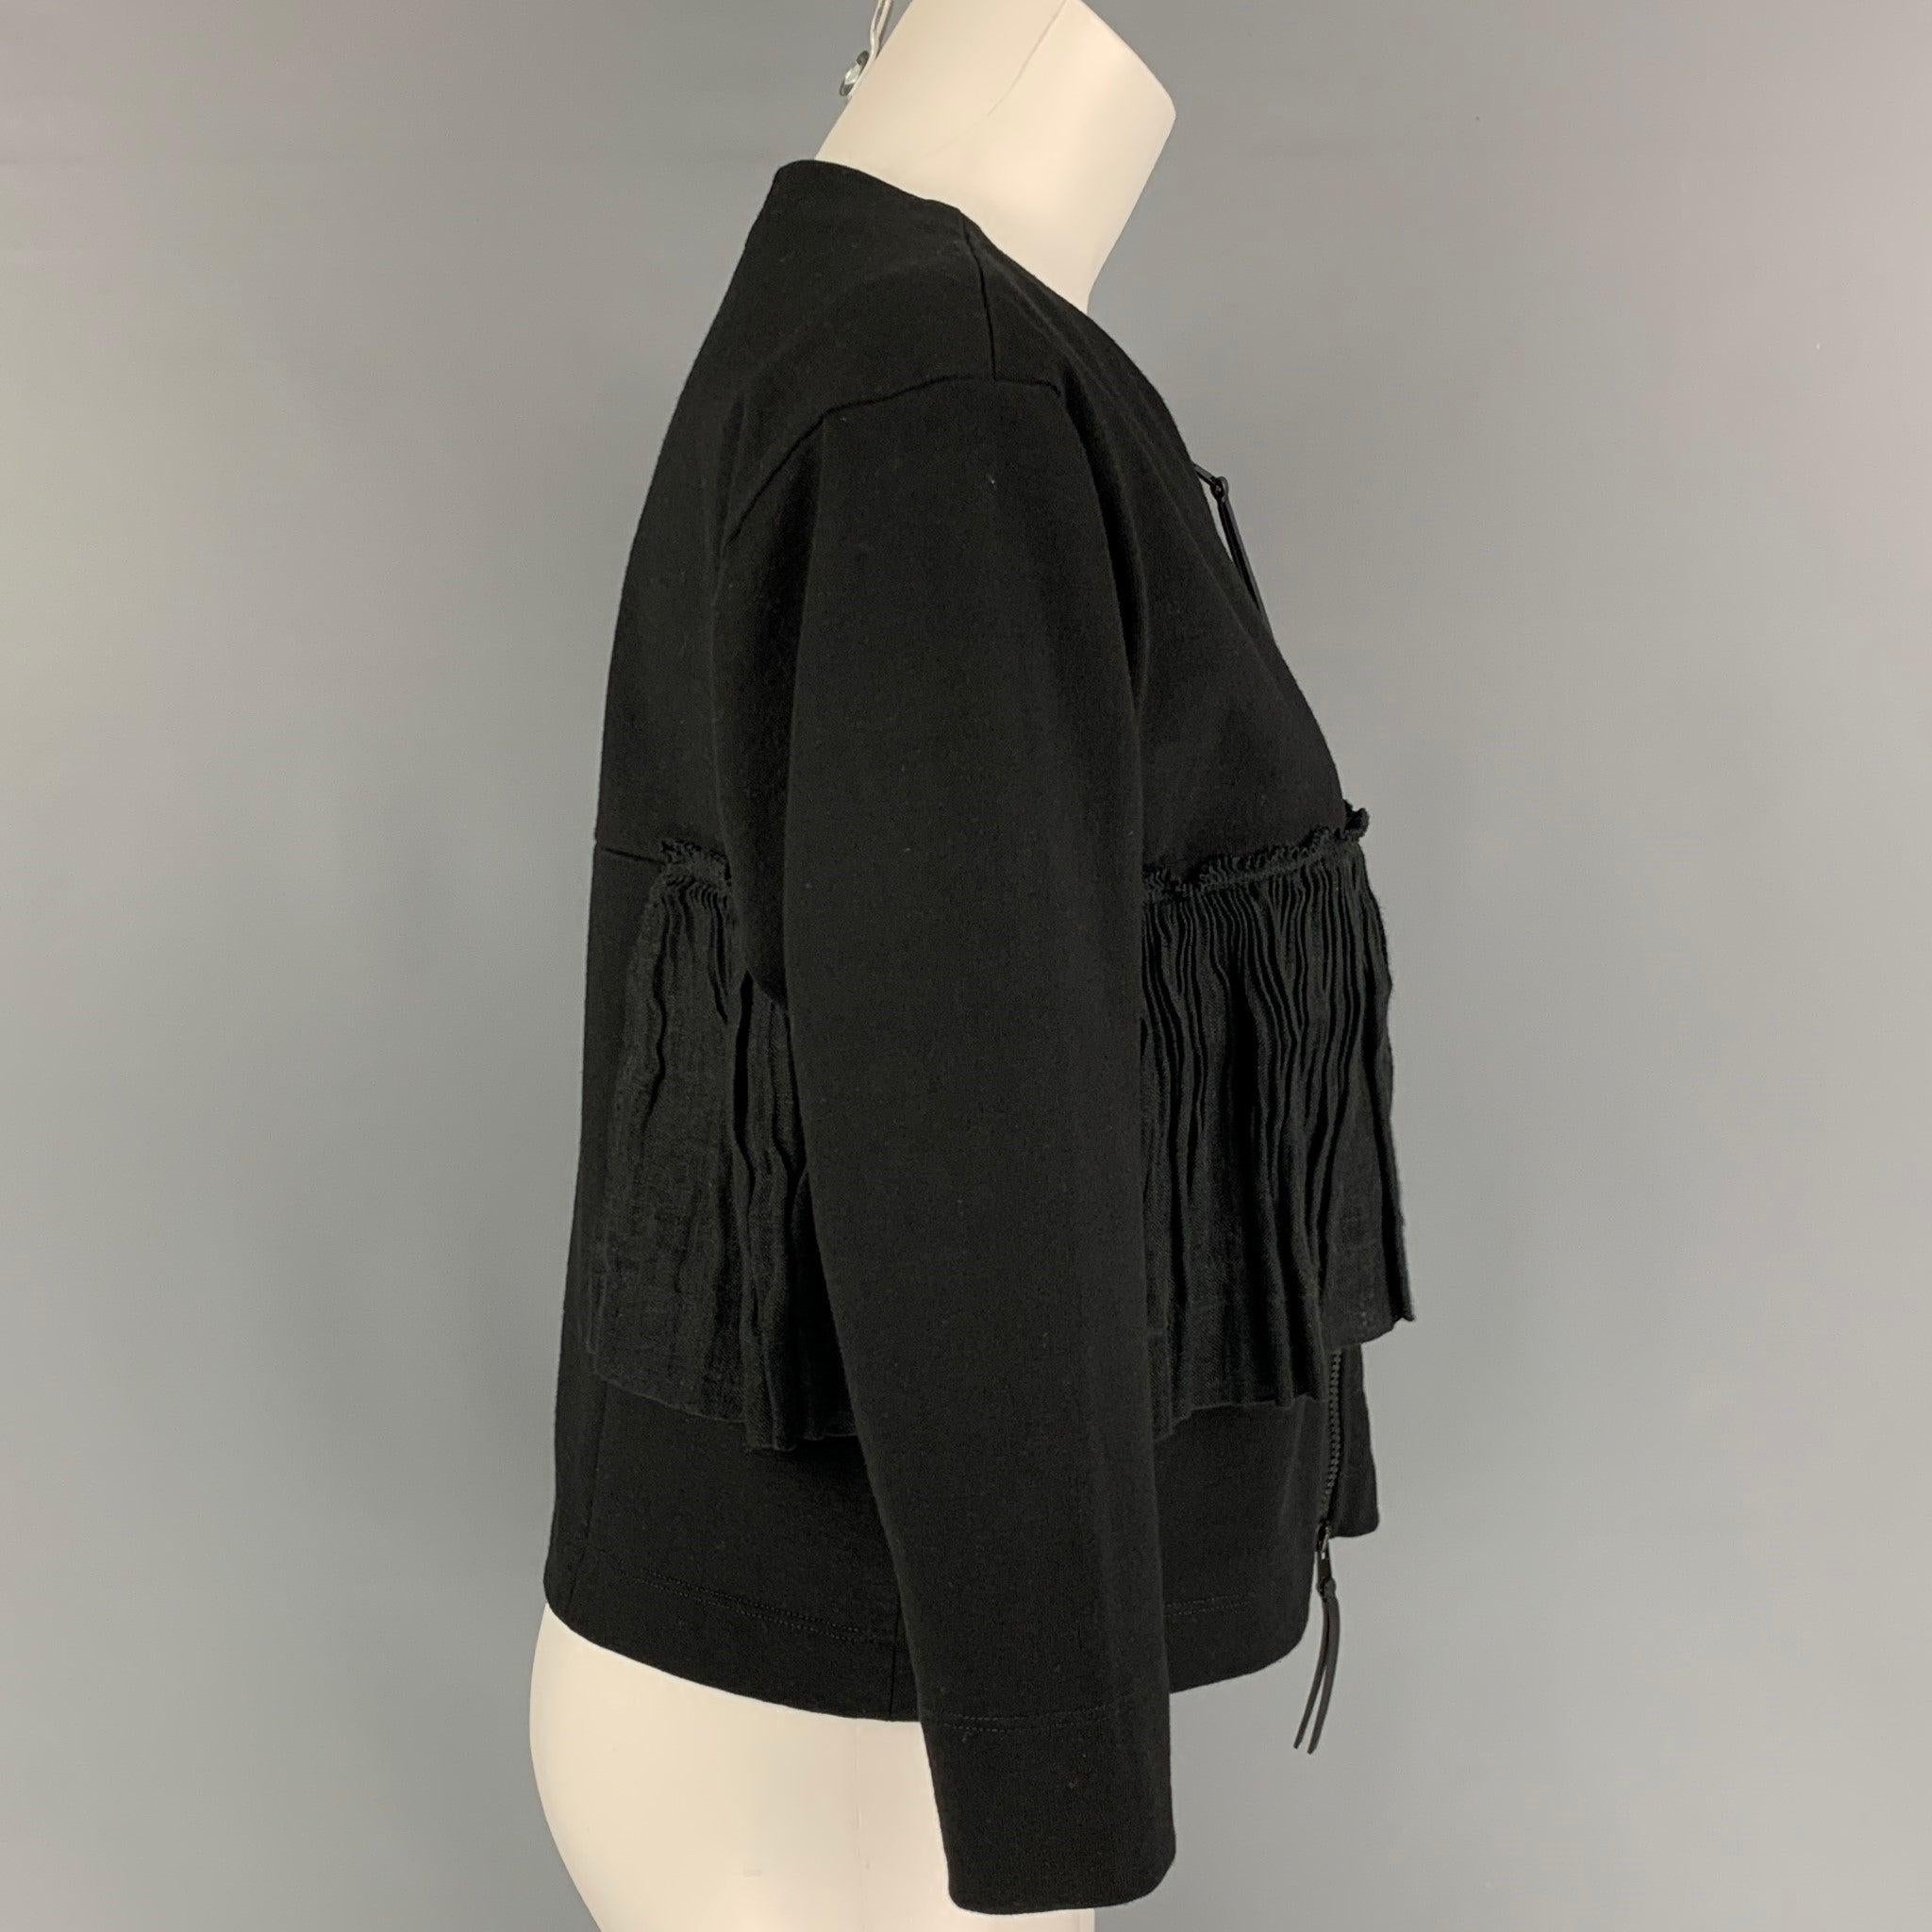 MARNI jacket comes in a black cotton / flax featuring a ruffled detail, 3/4 sleeves, and a front zipper closure. Made in Italy.
Very Good
Pre-Owned Condition. 

Marked:   38 

Measurements: 
 
Shoulder: 17.5 inches  Bust: 36 inches  Sleeve: 17.5